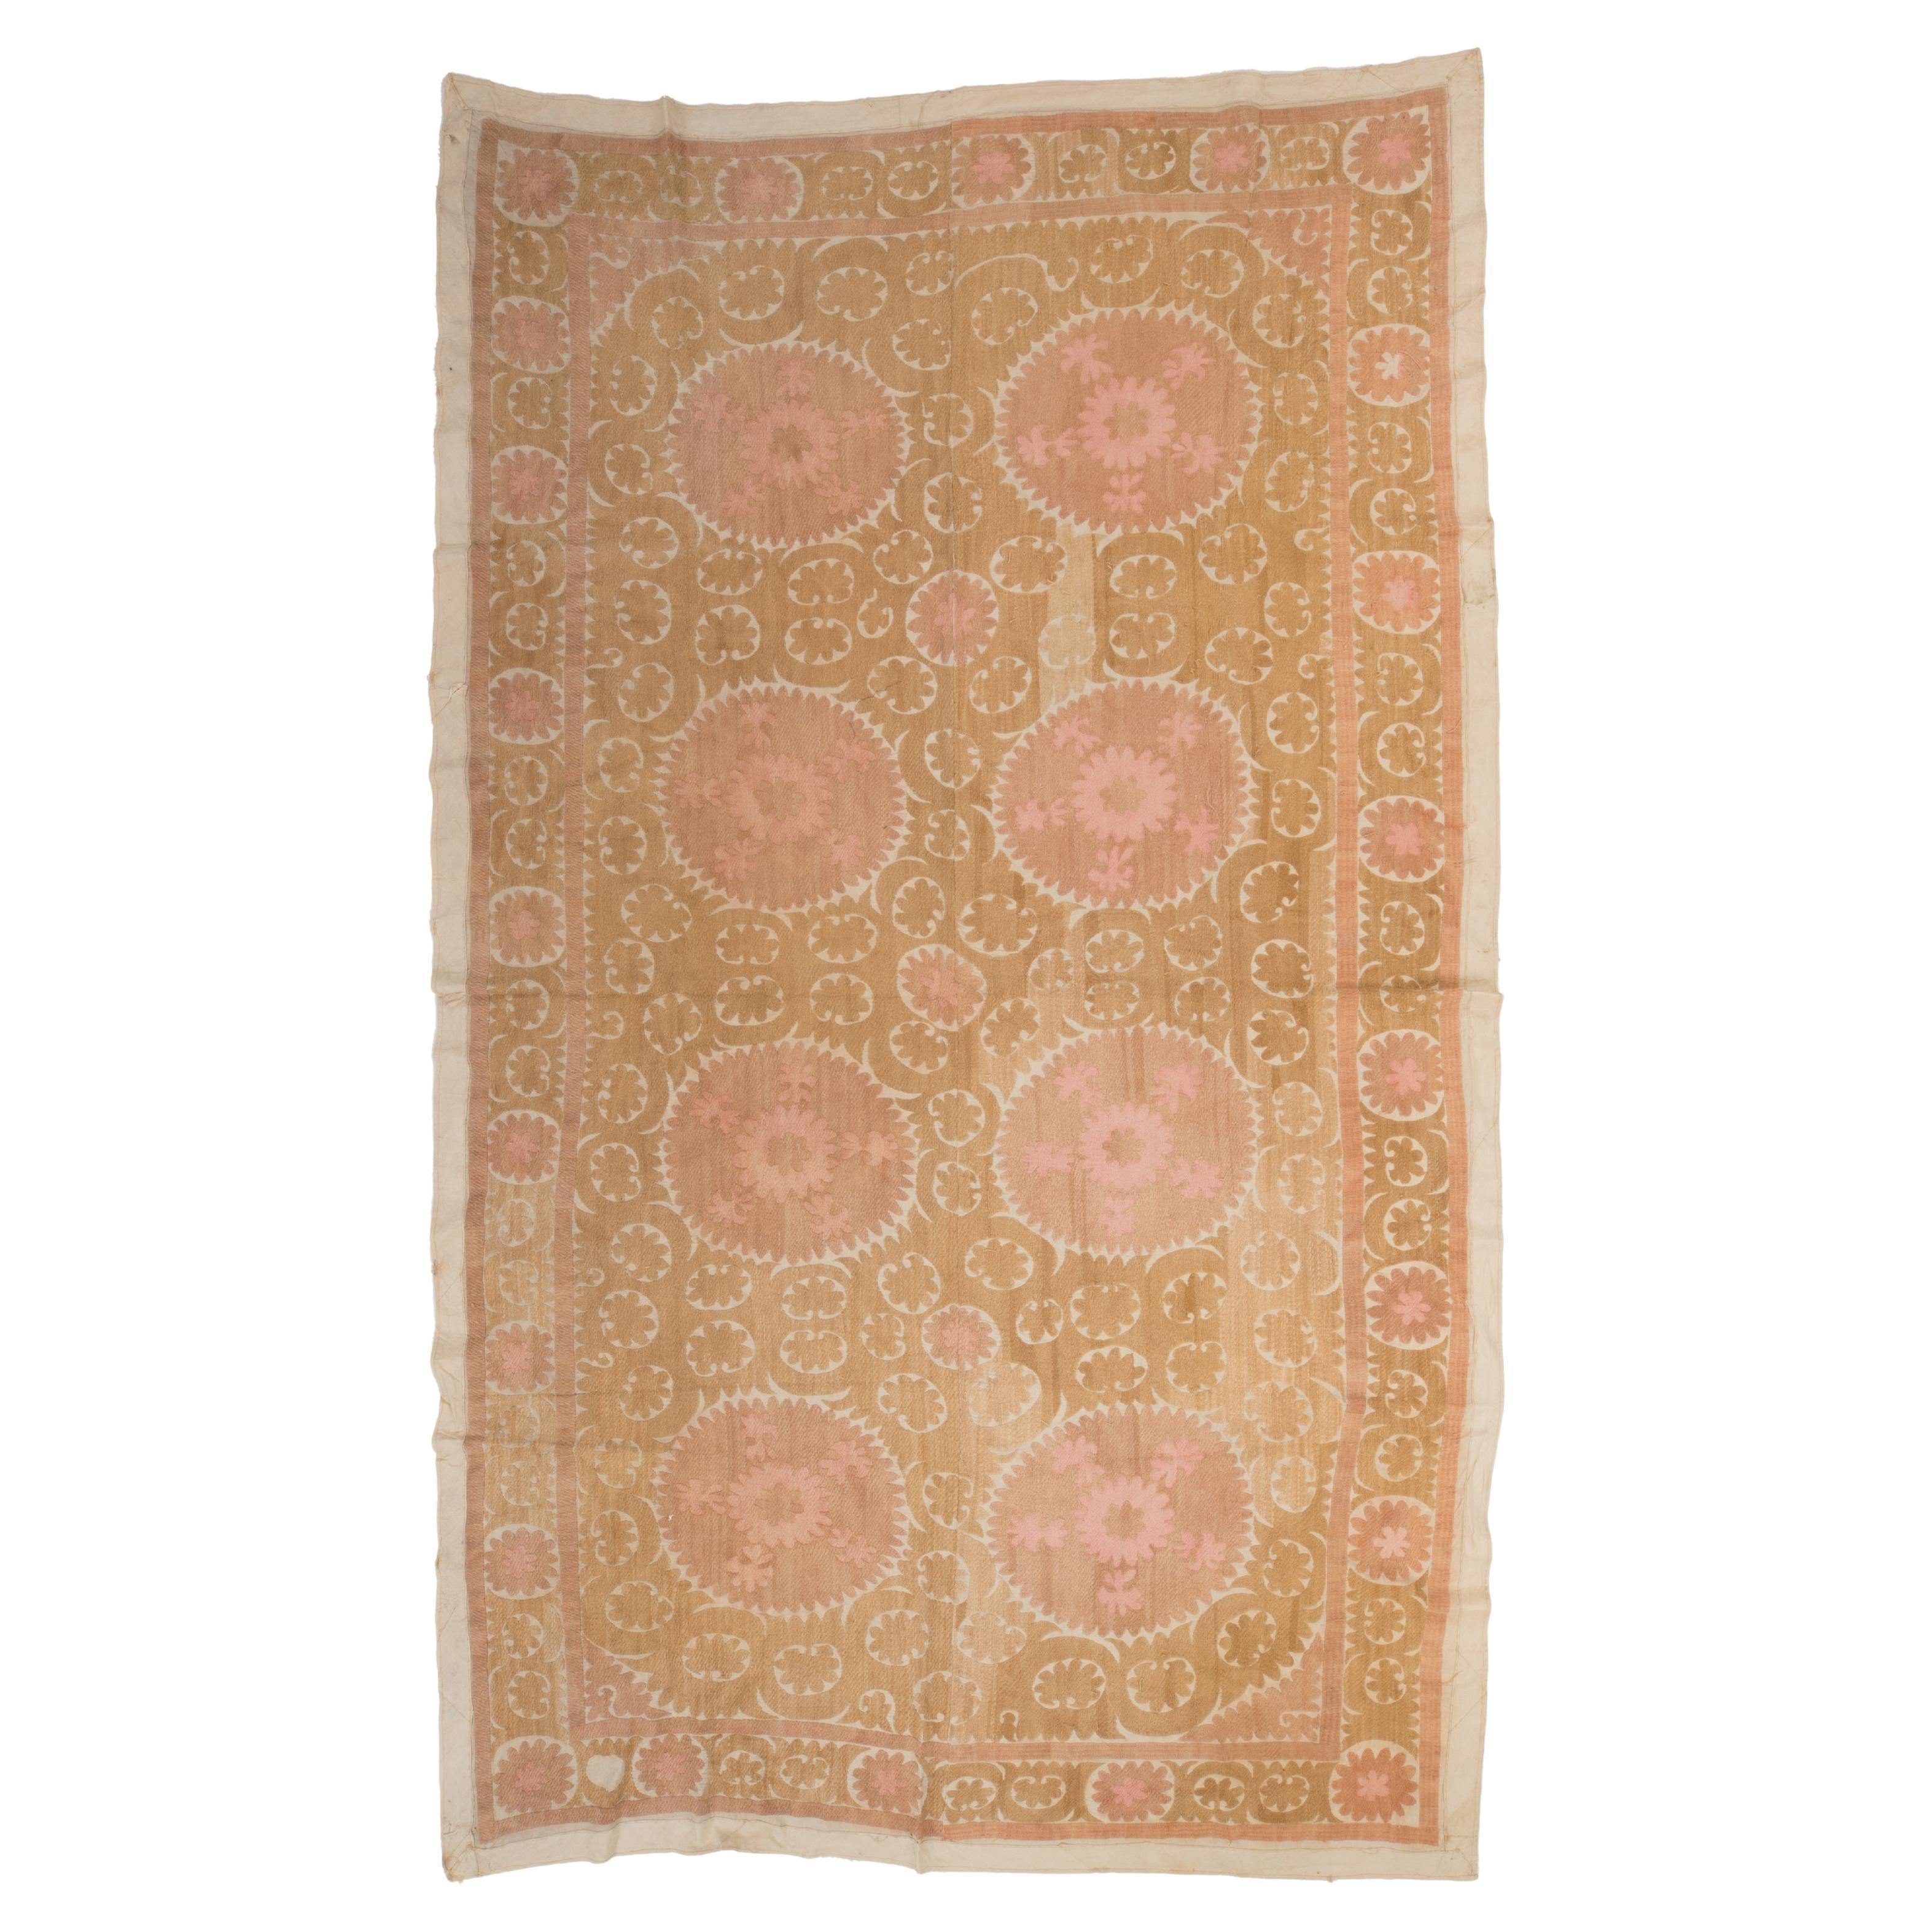 Decorative Mid 20th C Neutral Samarkand Suzani with Pinks For Sale